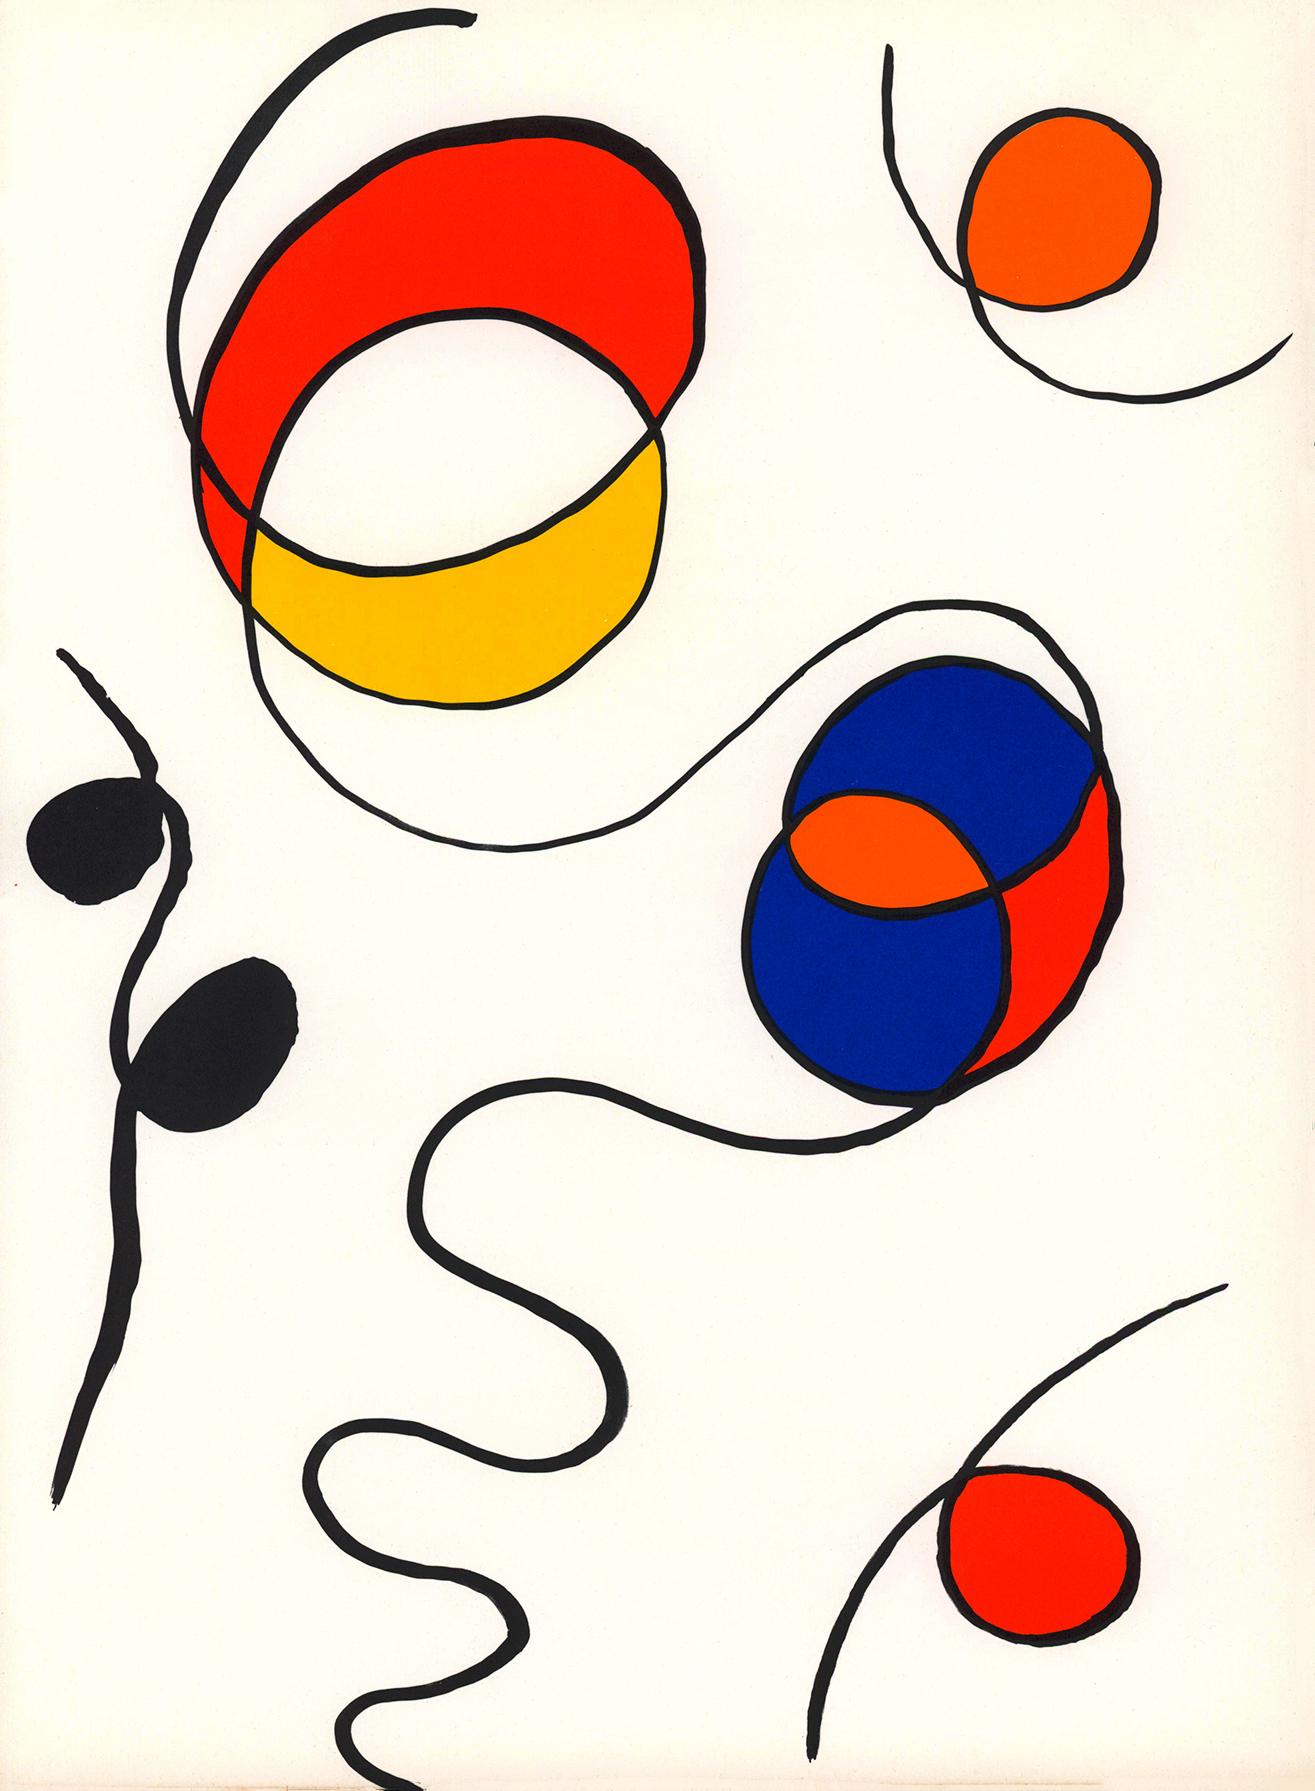 Alexander Calder Lithograph c. 1967 from Derrière le miroir:

Lithograph in colors; 15 x 11 inches.
Very good overall vintage condition; well-preseved. 
Unsigned from an edition of unknown.
From: Derrière le miroir Printed in France c. 1967.